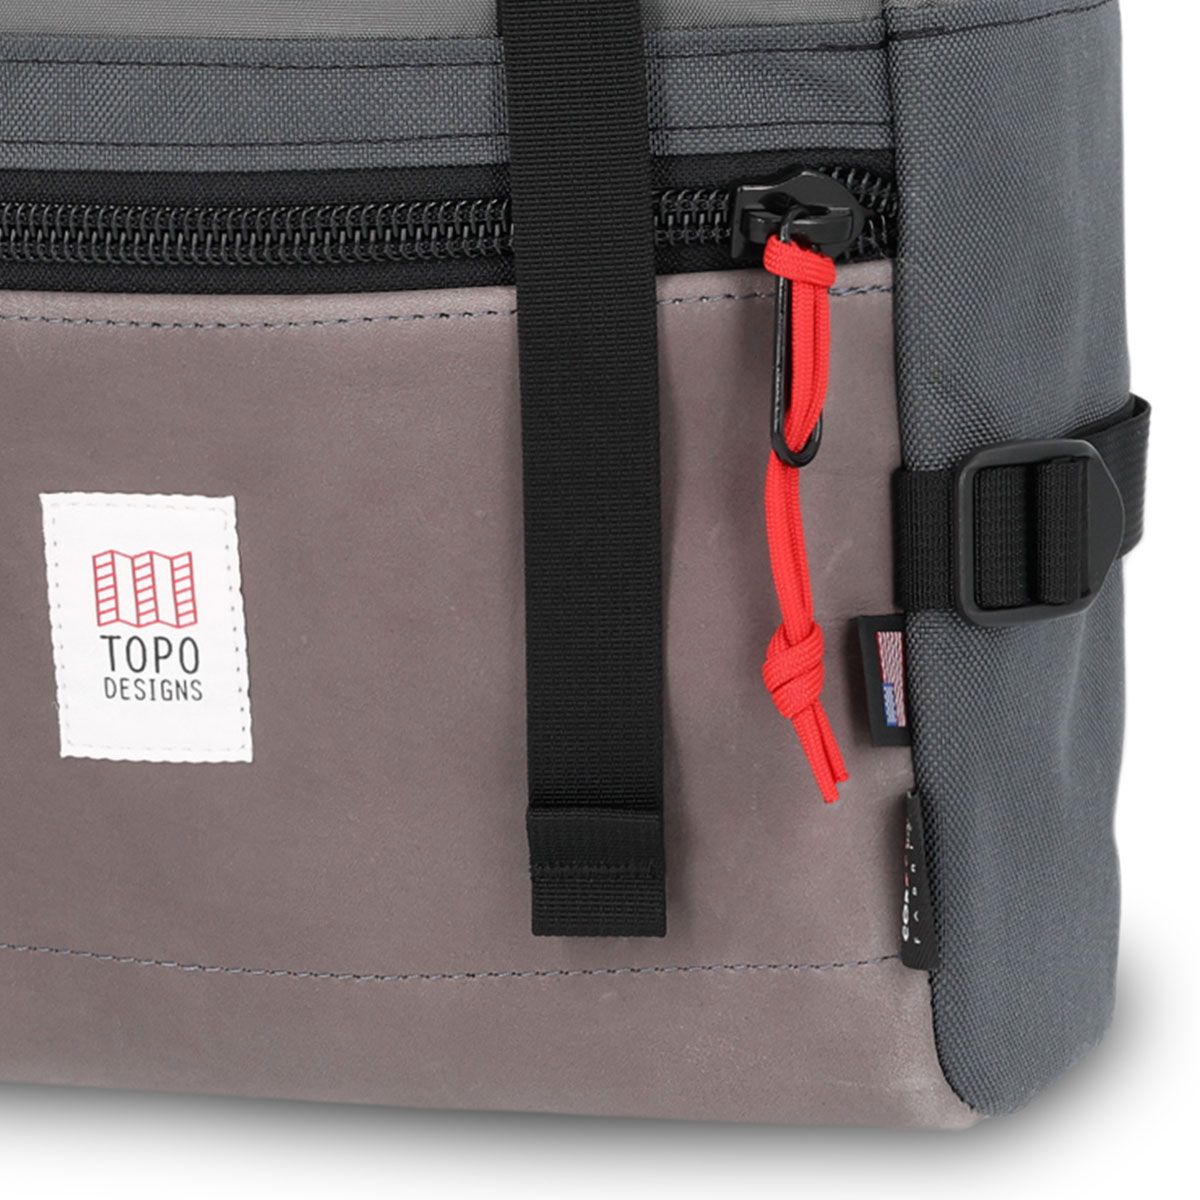 Topo Designs Rover Pack Leather Charcoal/Charcoal Leather, timeless backpack with great functionalities